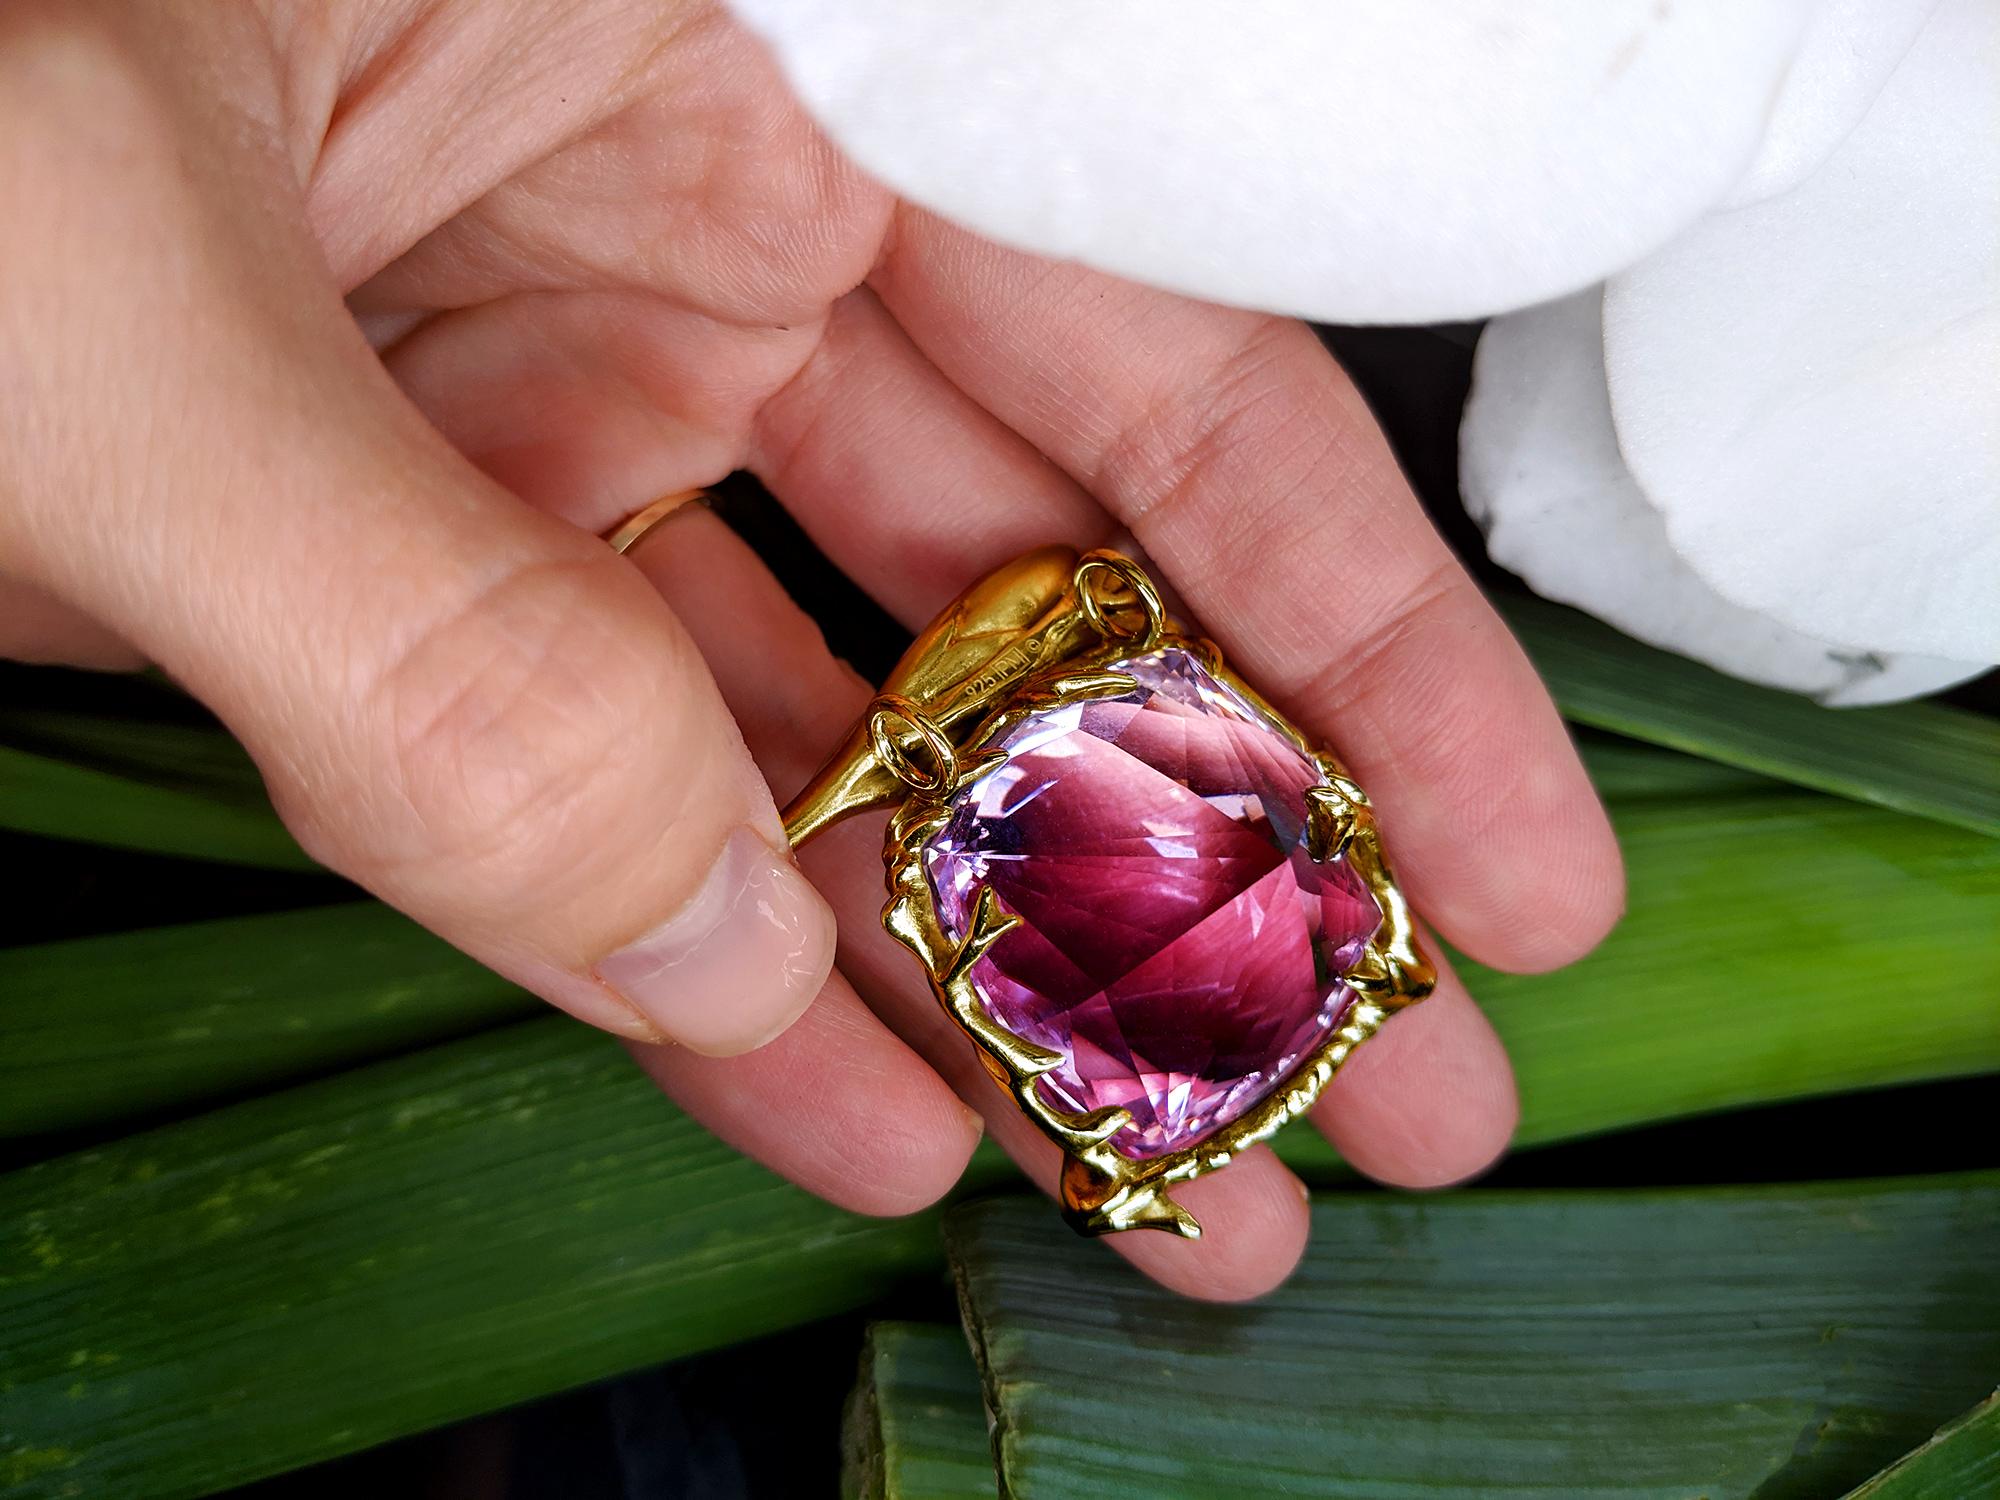 This Fairy Tale pendant necklace is a contemporary masterpiece designed by oil painter Polya Medvedeva. It is crafted from 18 karat yellow gold and features a giant cushion cut amethyst that radiates vivid lavender tones. The ring is adorned with